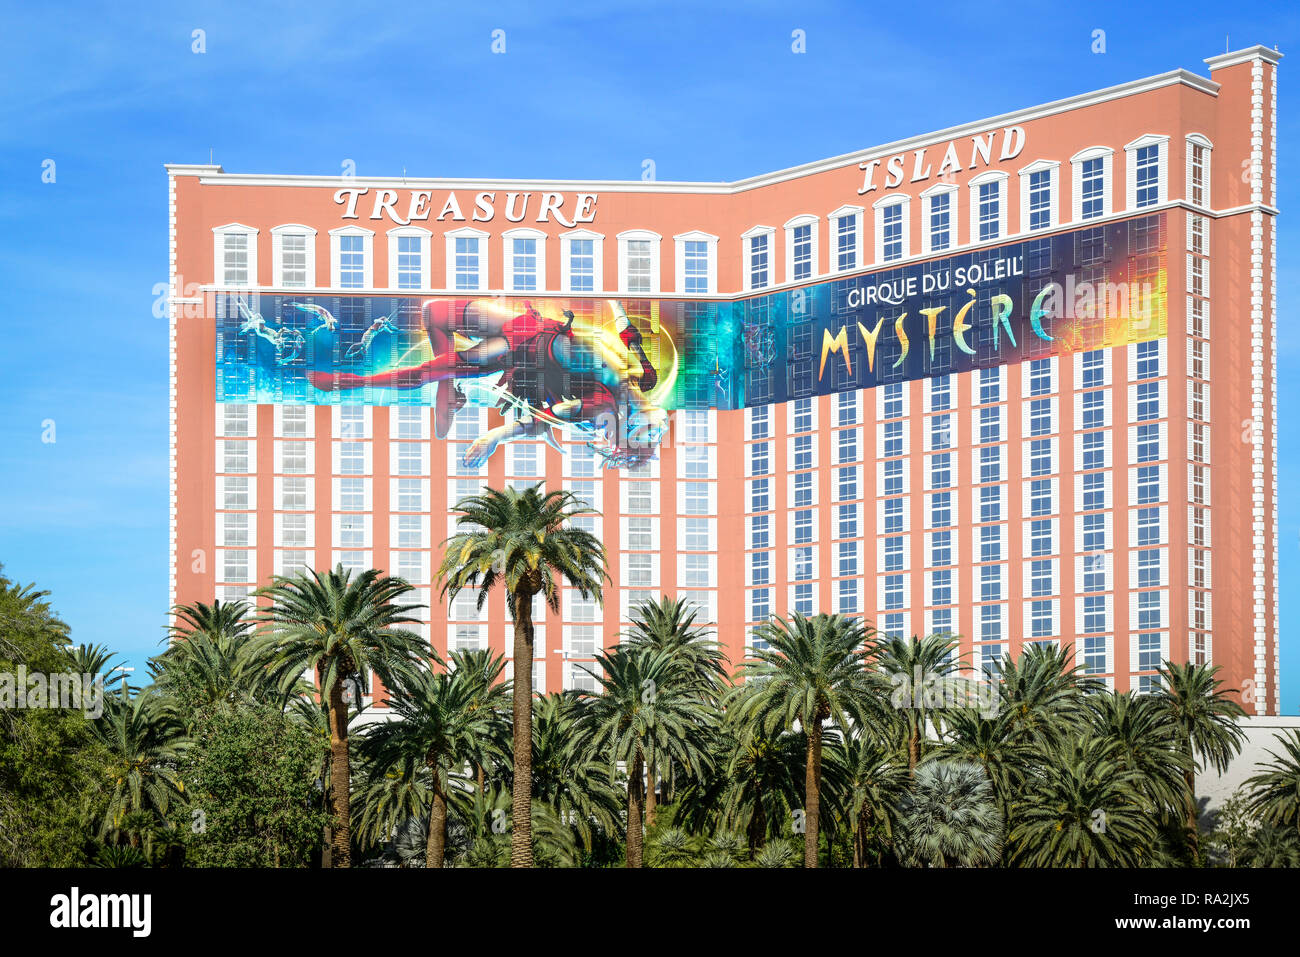 The Treasure Island Resort Hotel and Casino amongst the Palm trees advertising for the Cirque du Soiell's Mystere show on the strip in Las Vegas, NV Stock Photo